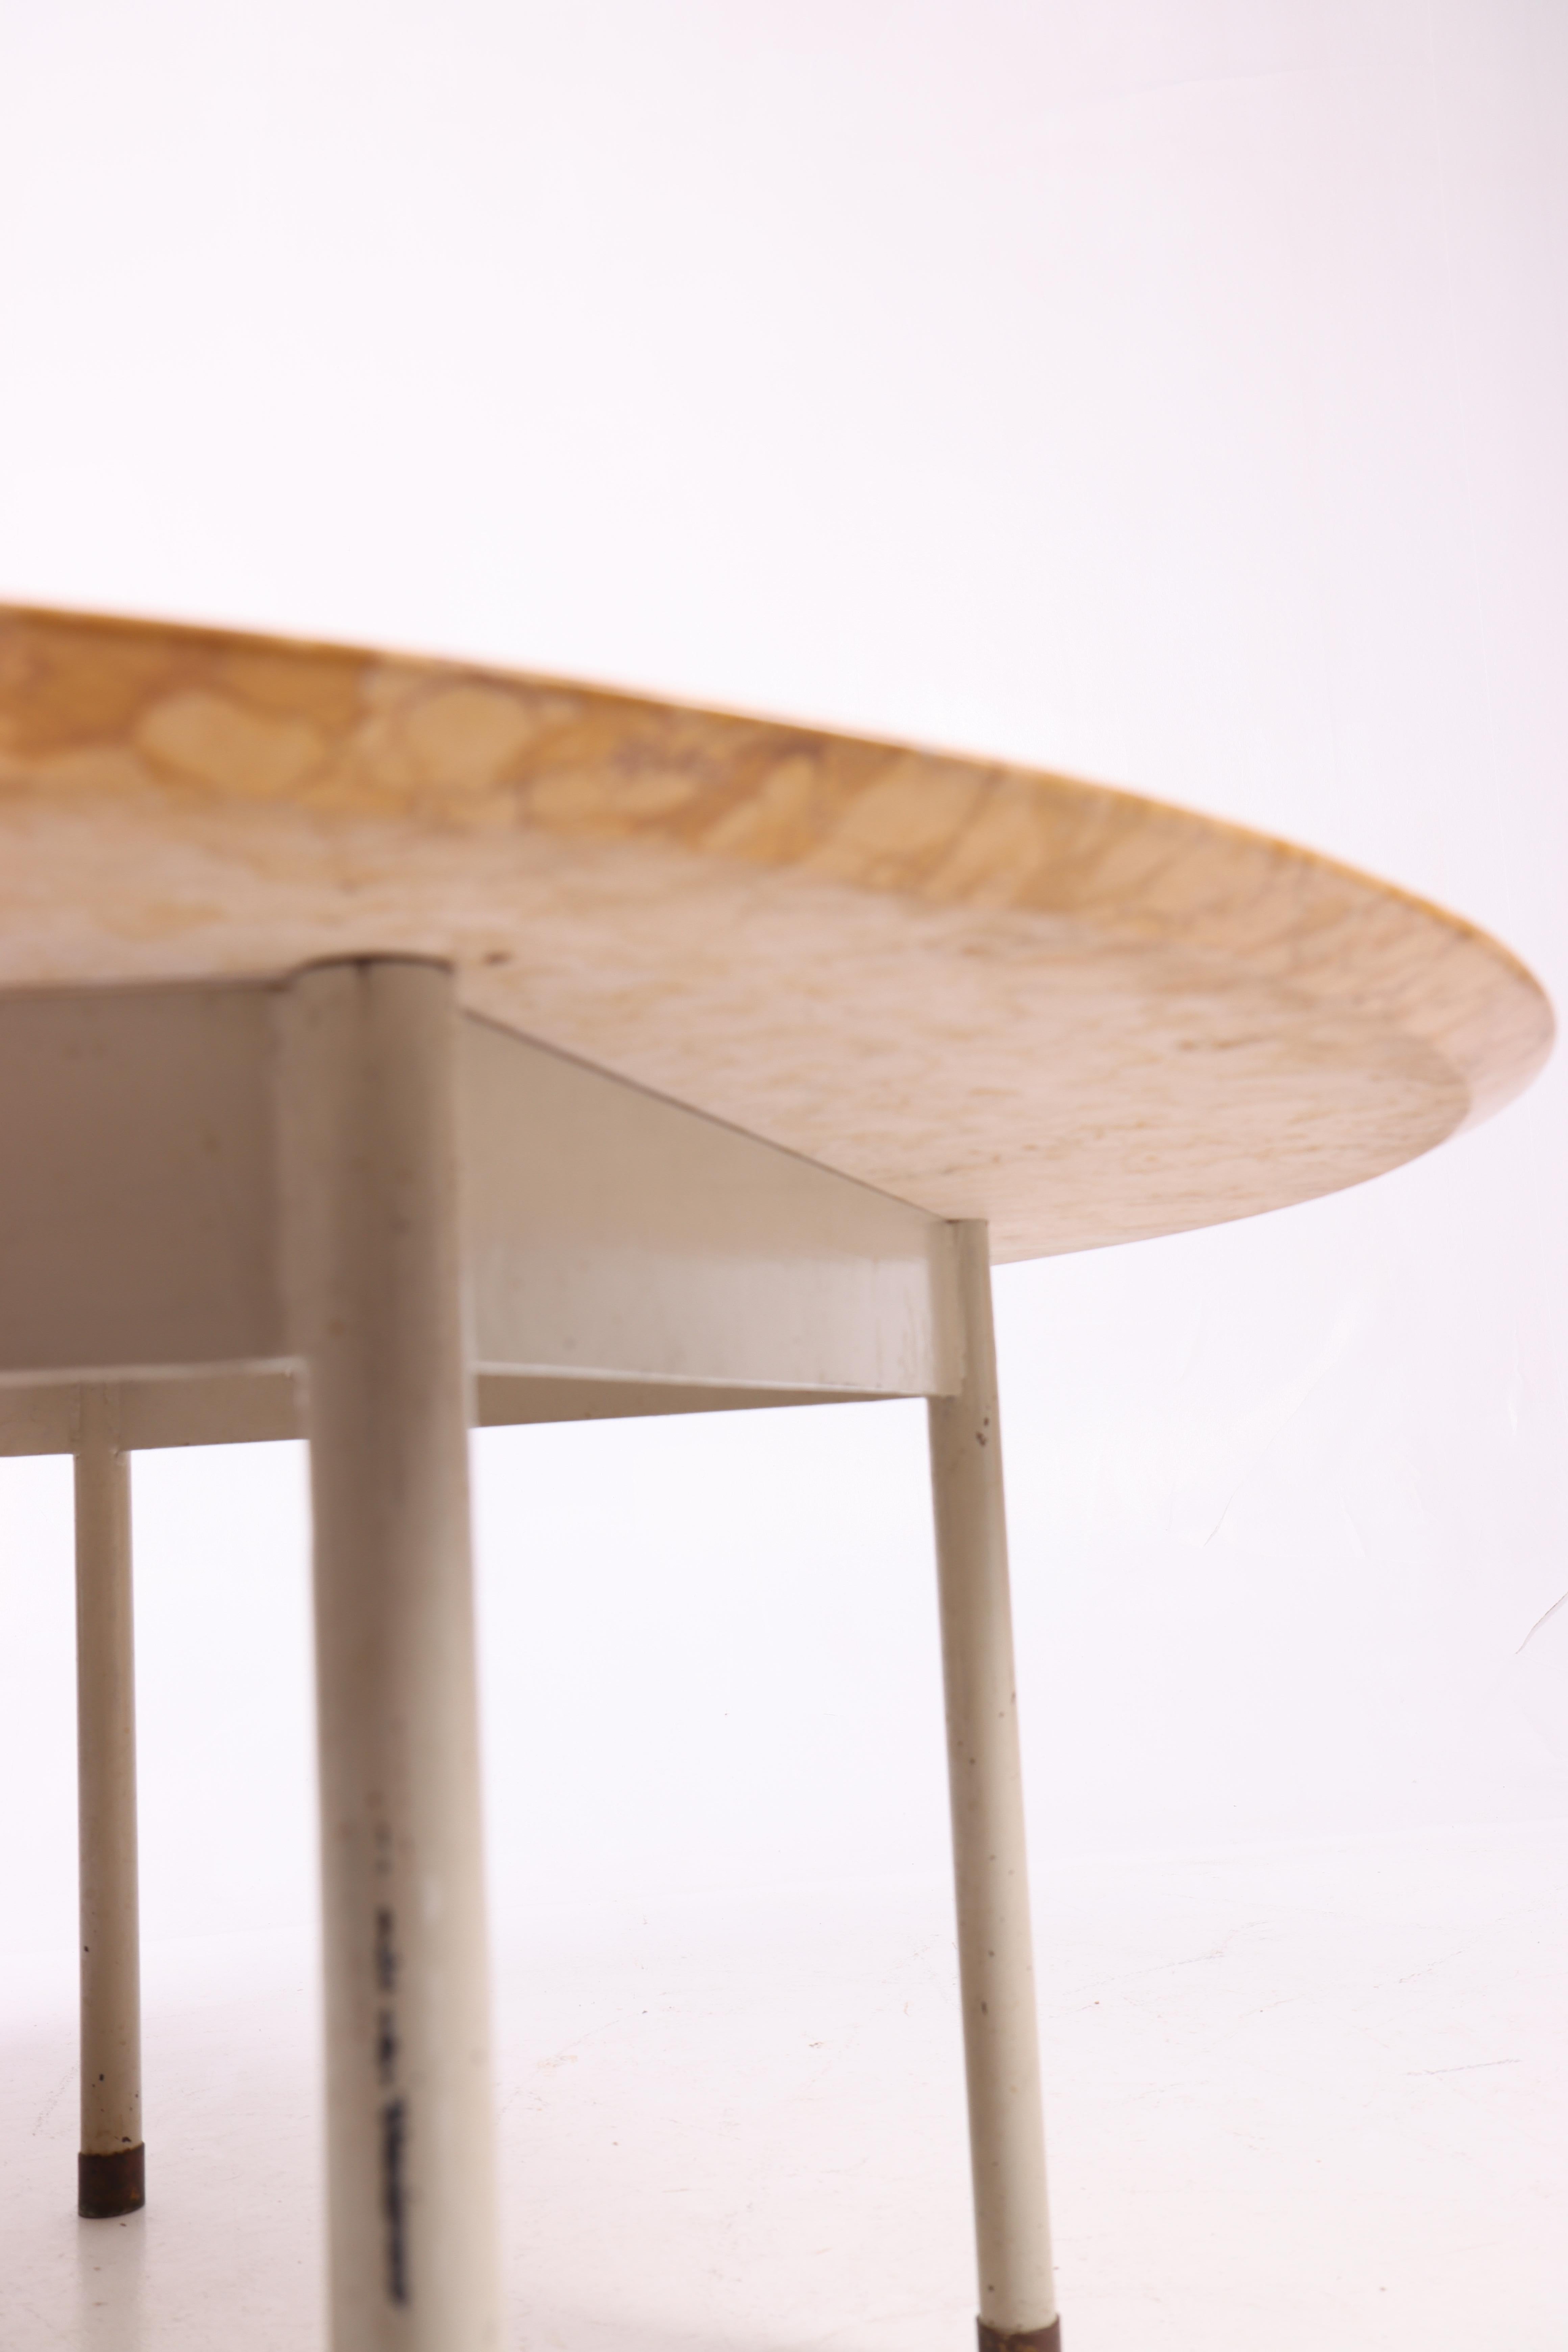 Danish Midcentury Circular Low Table with Red Verona Marble Top by Acton Bjørn. For Sale